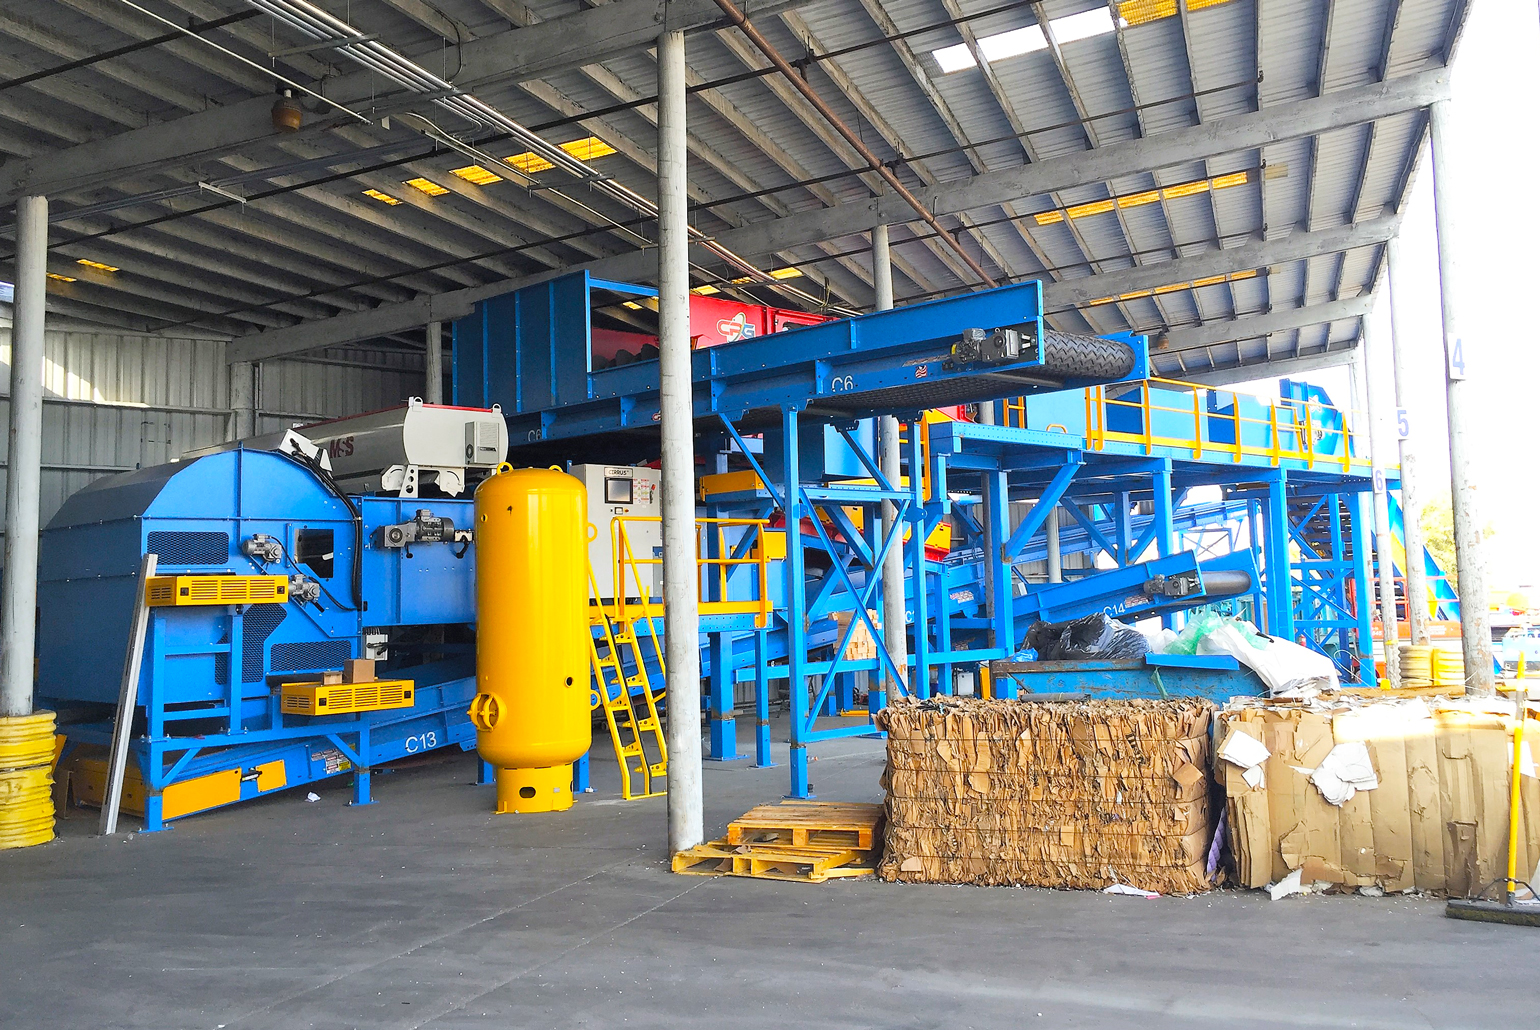 Resource Management Group's 15 TPH commercial single stream recycling system, designed and built by CP Group